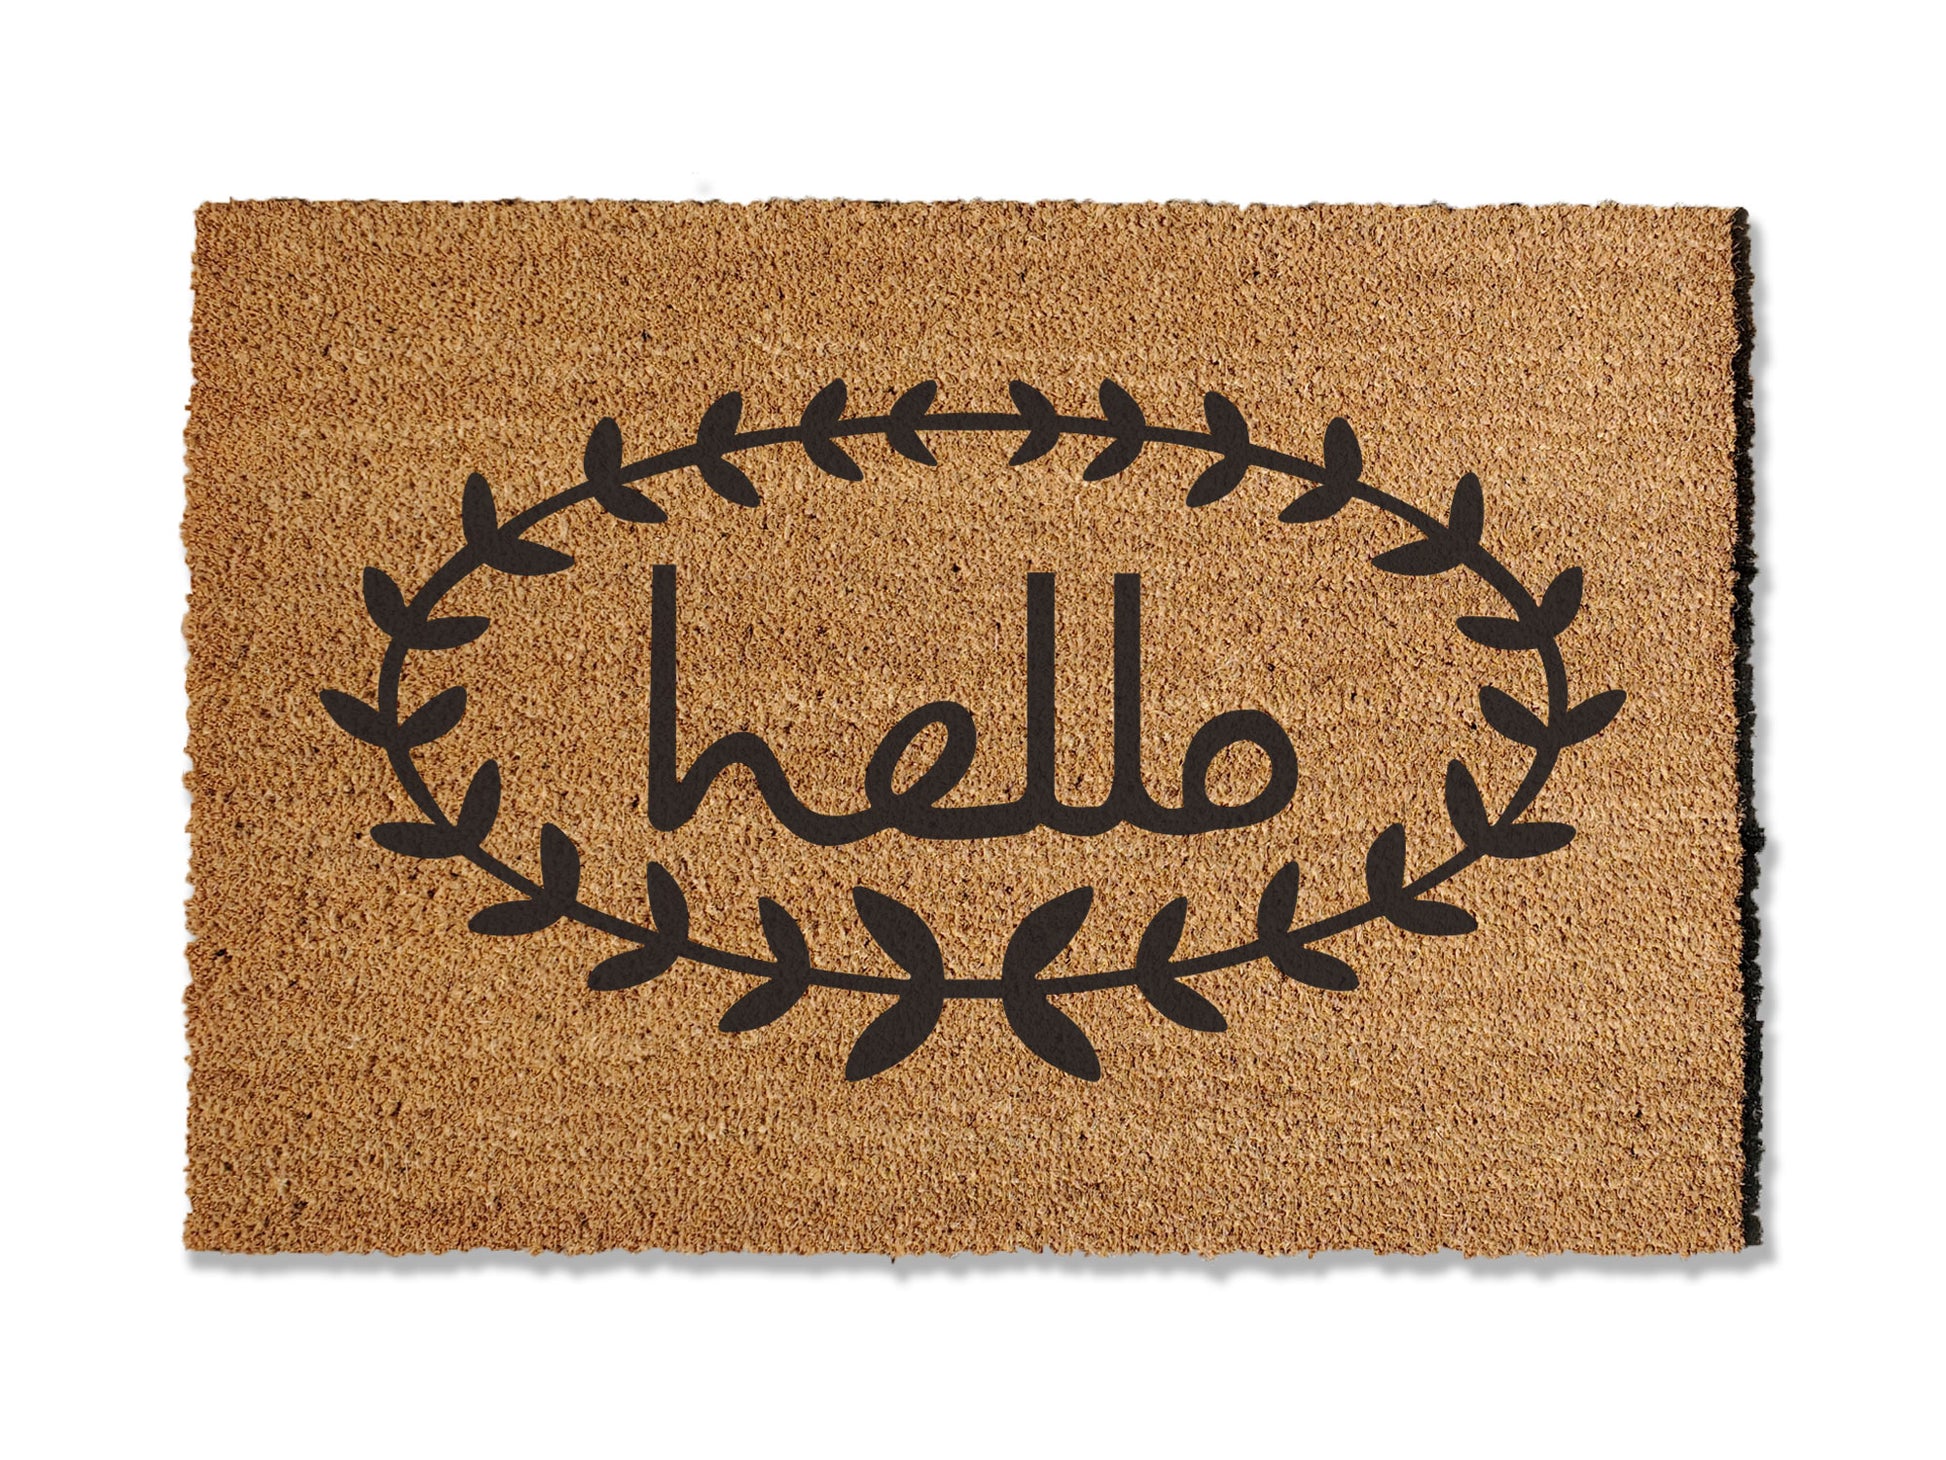 Welcome guests with our coir doormat adorned with a 'Hello' greeting surrounded by a leaf border. Available in multiple sizes, this versatile mat is perfect for year-round use, adding a touch of elegance to your entryway. Not only does it elevate your home's entrance, but it also effectively stops dirt from entering your space.